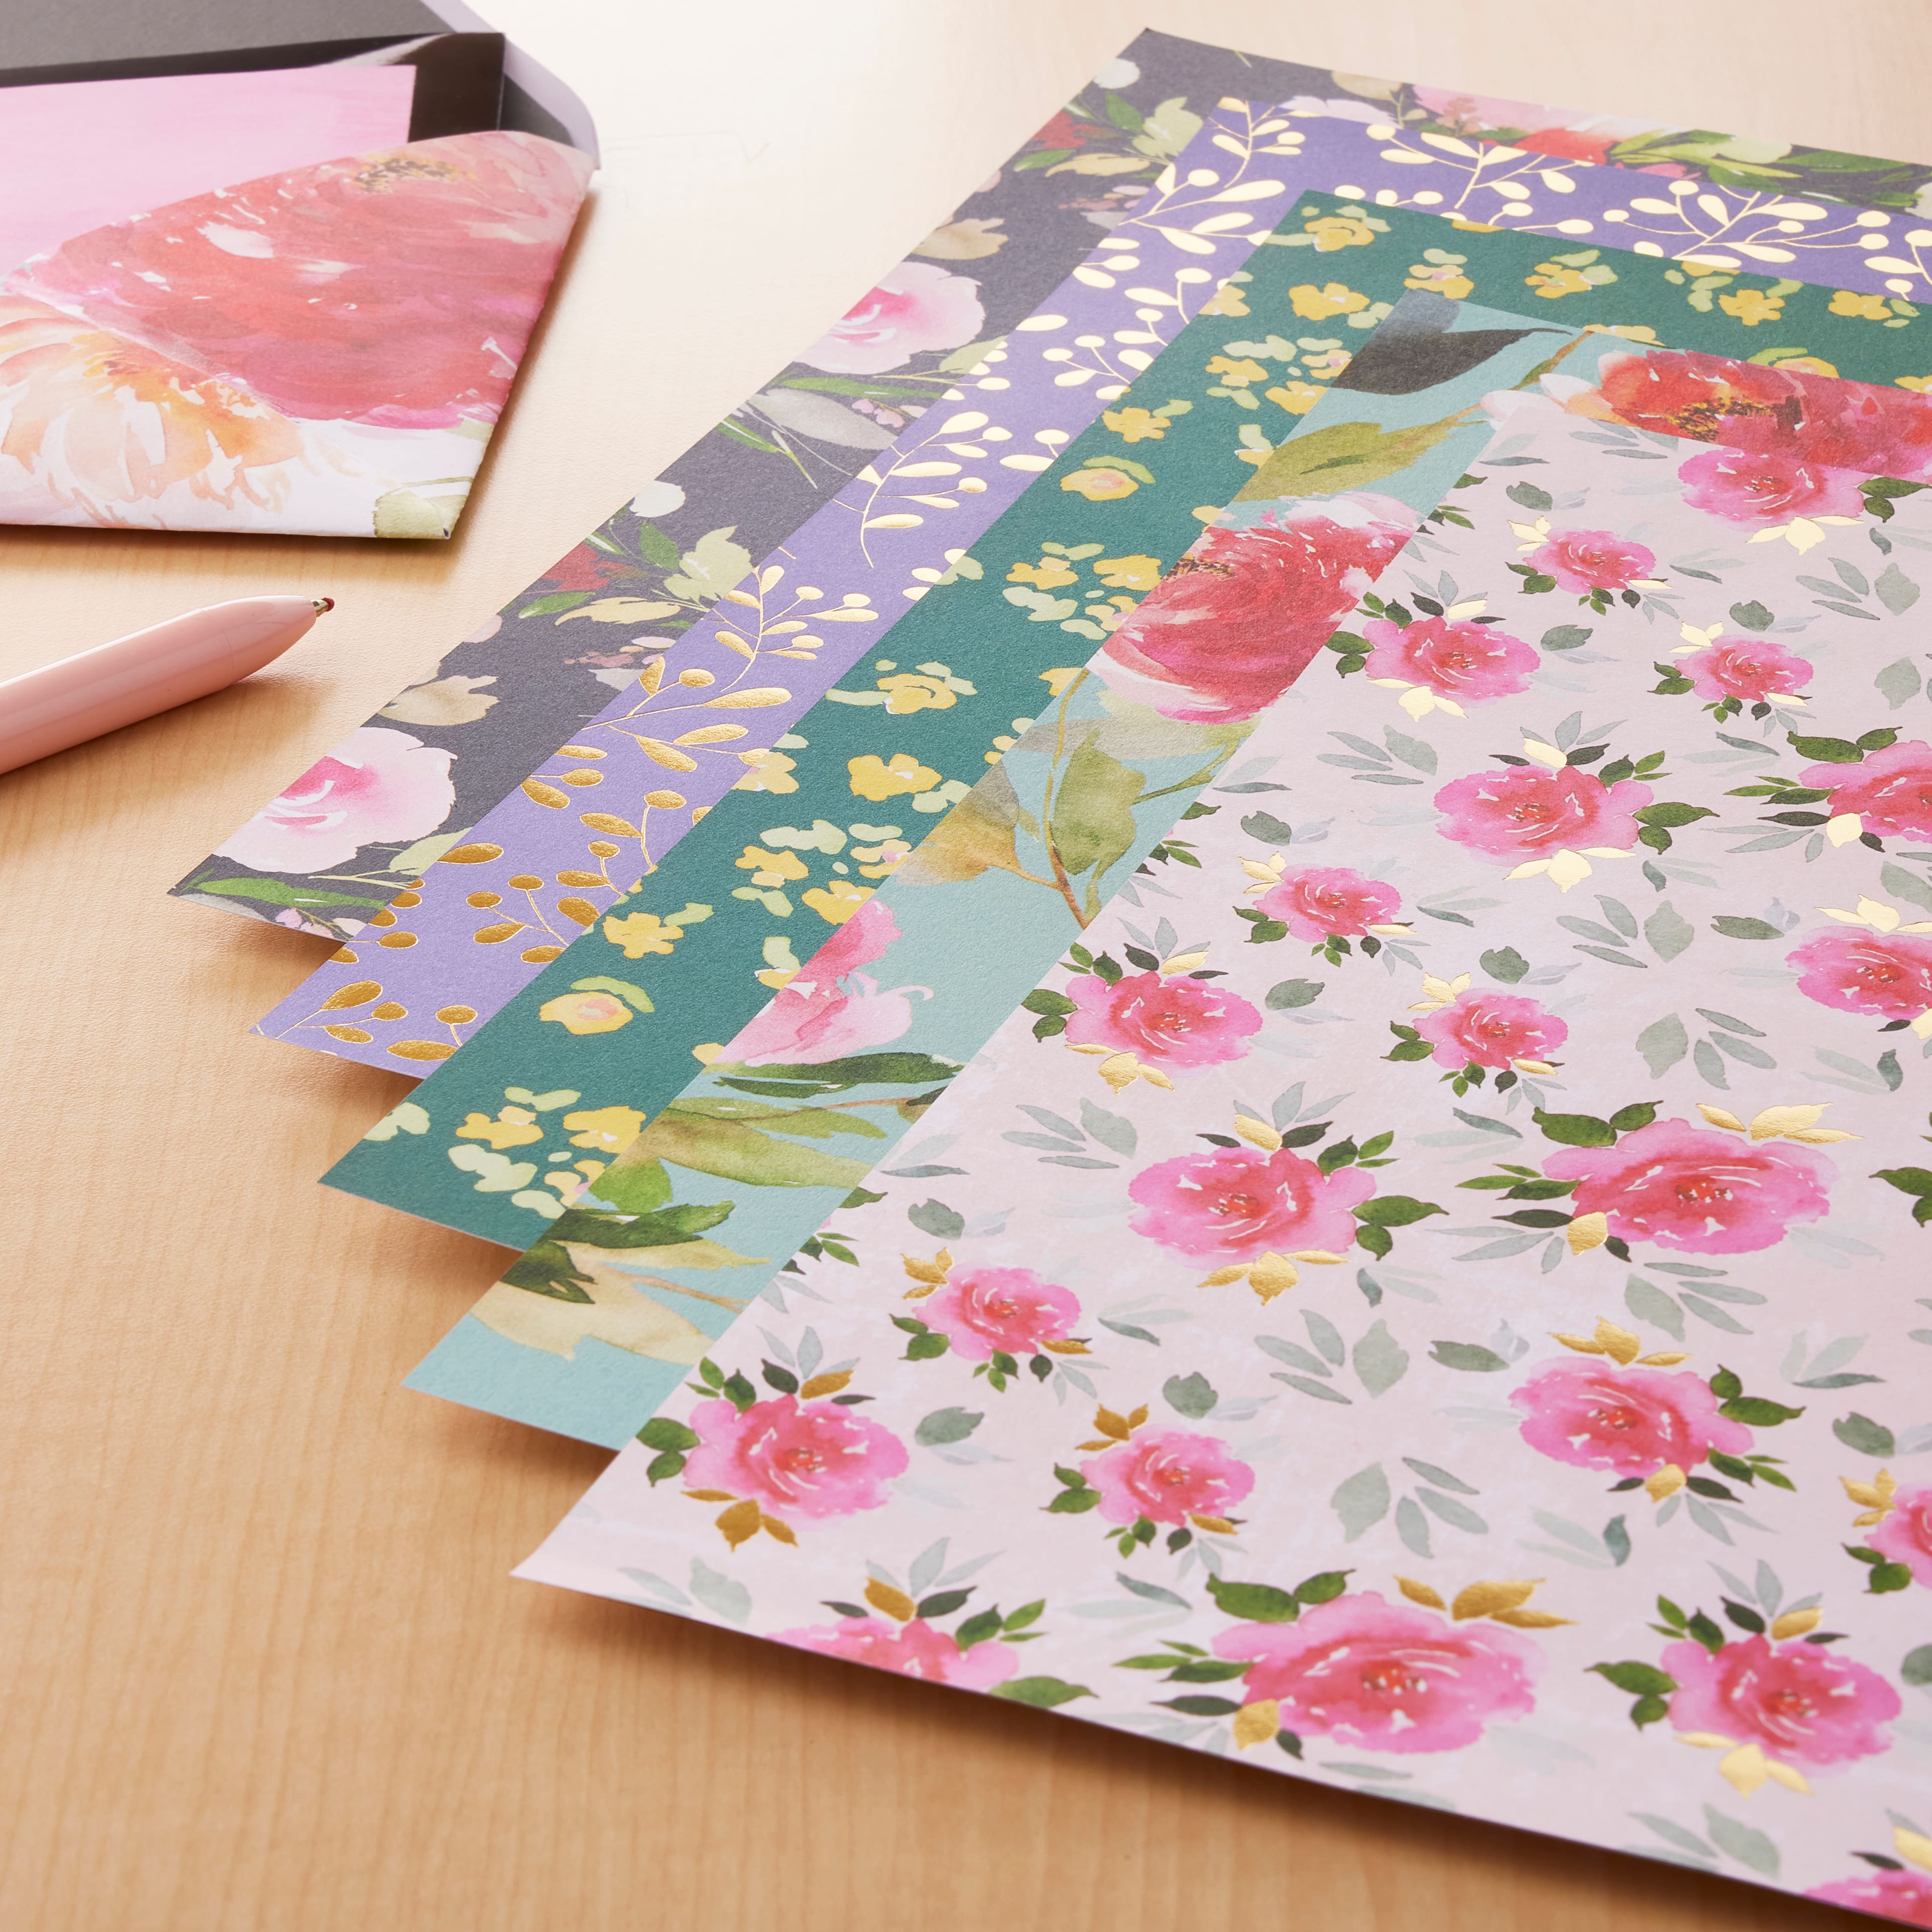 Florals Paper Pad by Recollections&#x2122;, 12&#x22; x 12&#x22;